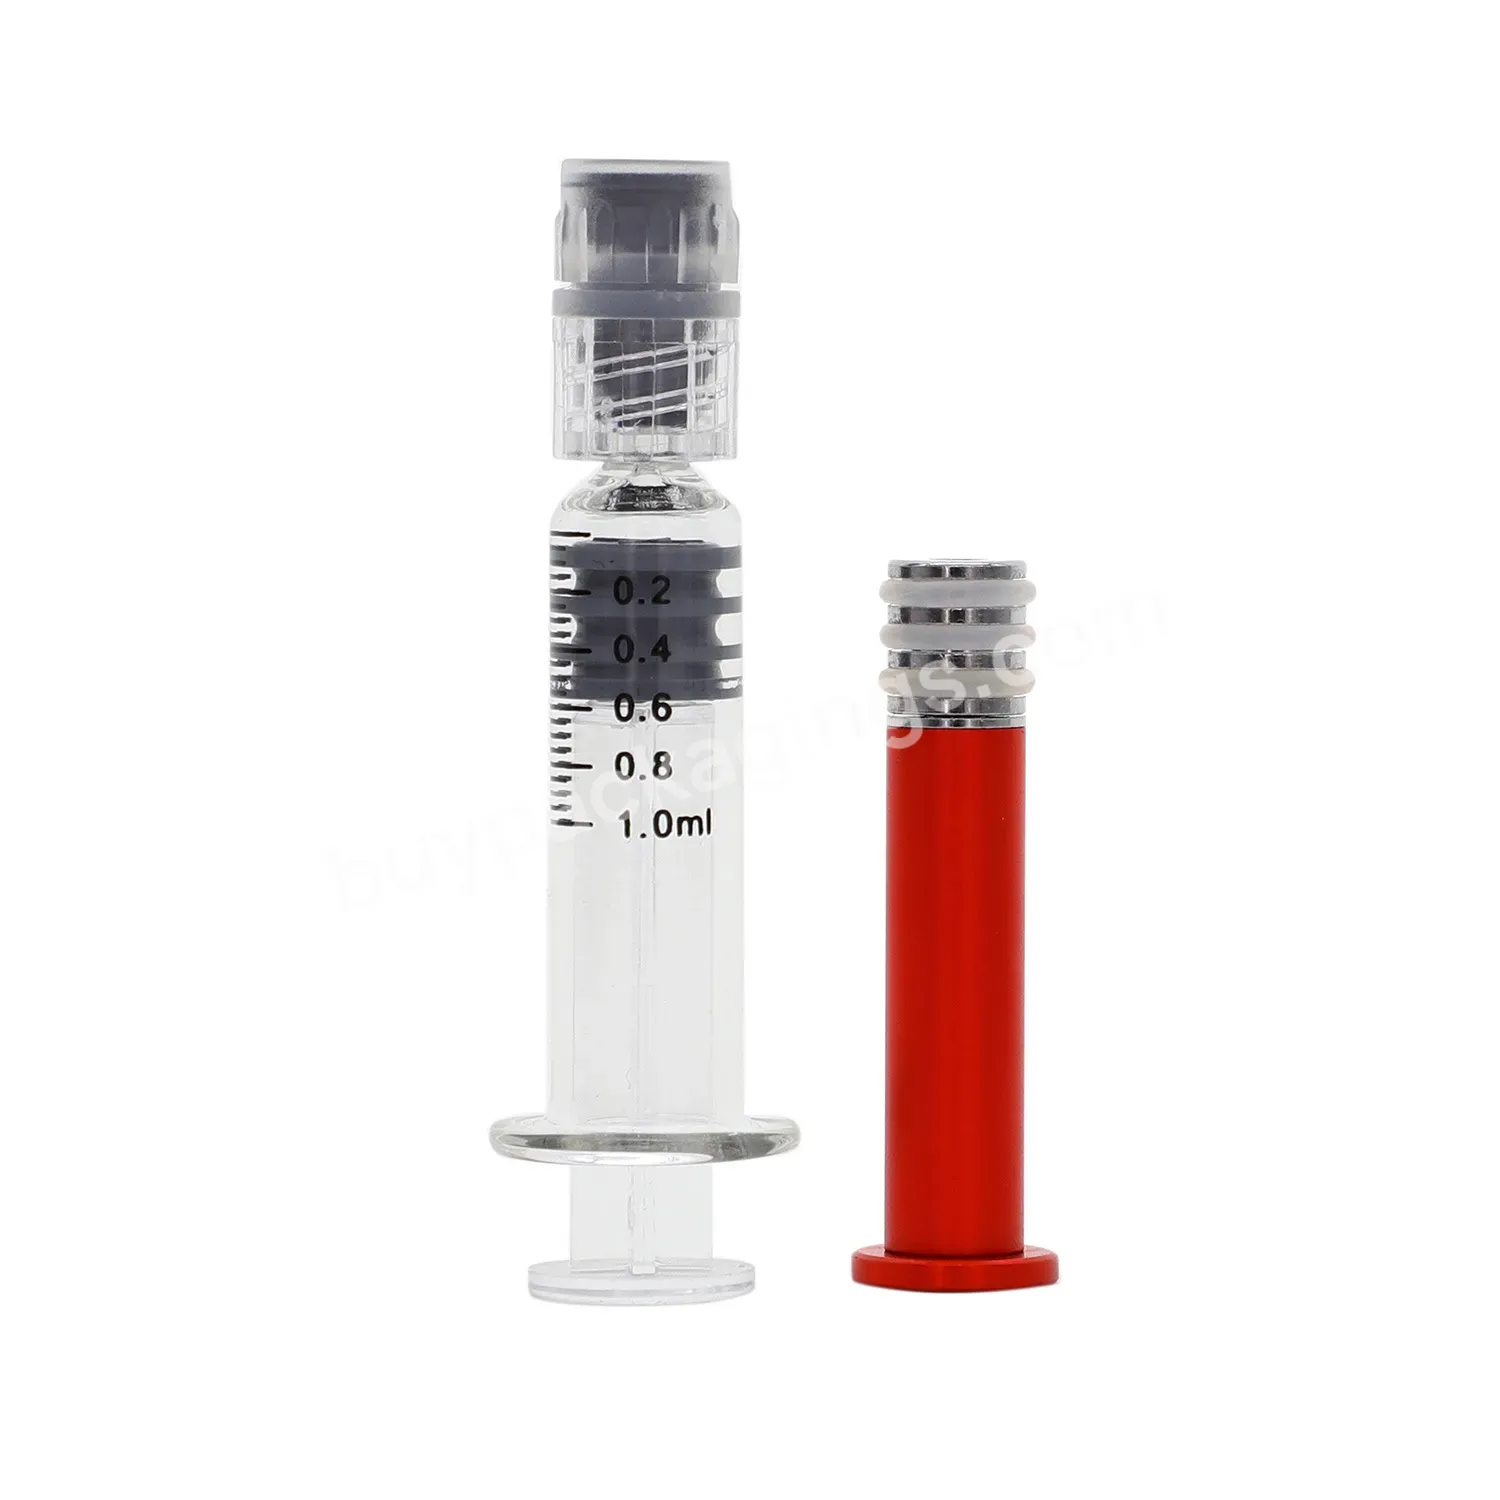 Fast Delivery Factory Price Borosilicate 1ml Glass Syringes With Gold Metal Plunger 1ml Syringe With Luer Lock - Buy 1ml 2.25ml 3ml 5ml 10ml Luer Lock Borosilicate Glass Syringe Packaging For Distillate Oil,1ml Long Luer Lock Glass Syringe With Backs